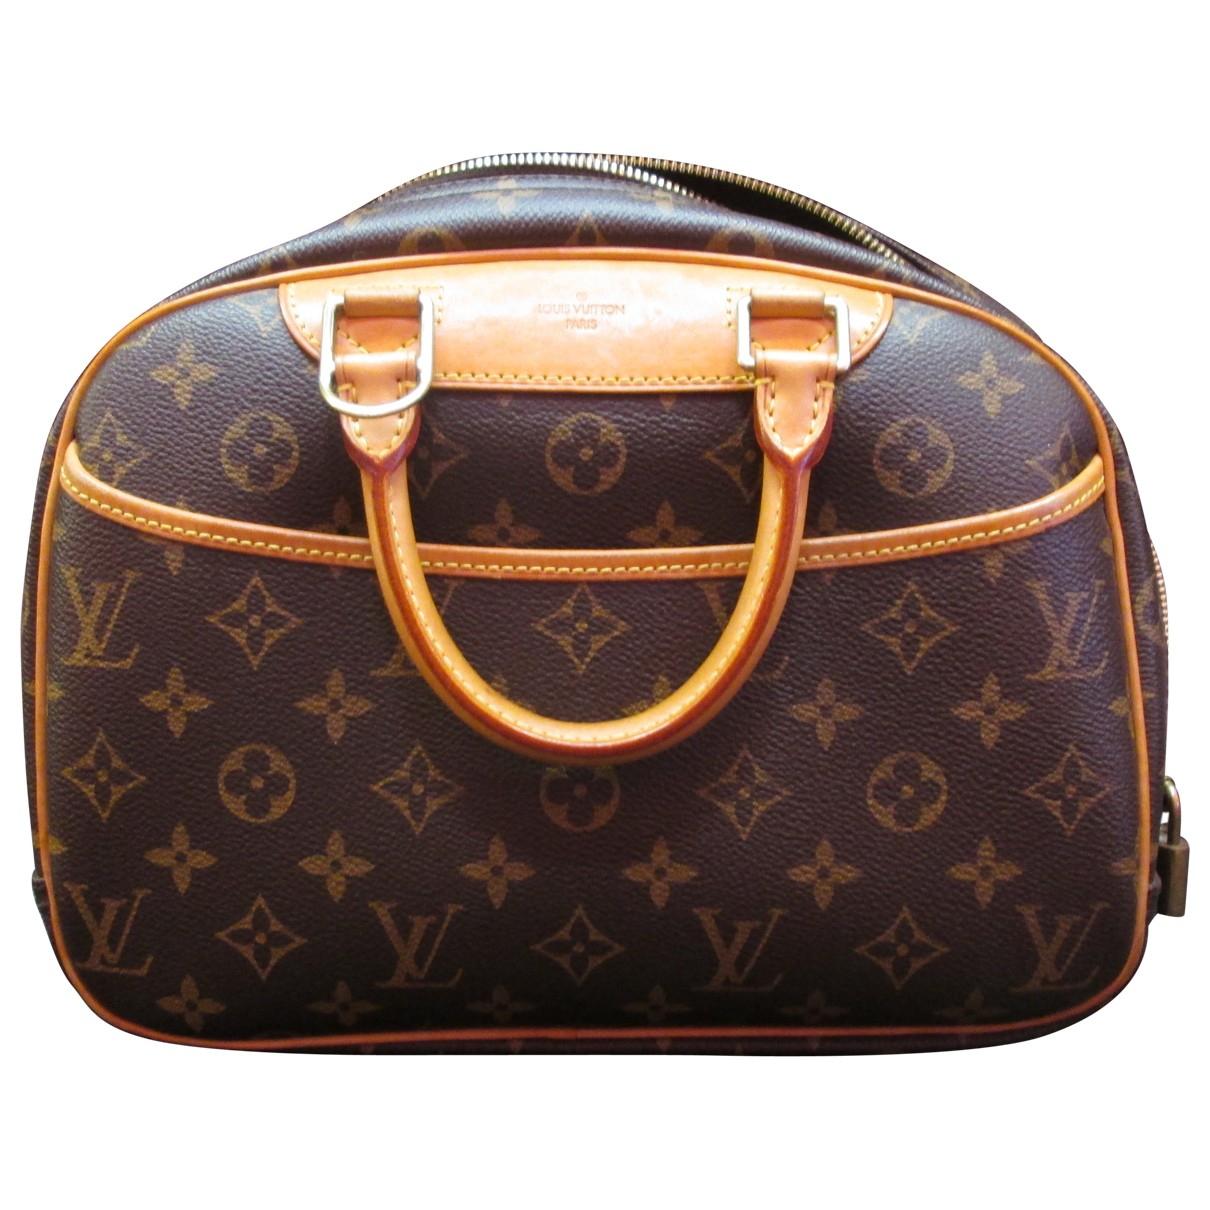 Louis Vuitton Pre-owned Trouville Leather Handbag in Brown - Lyst